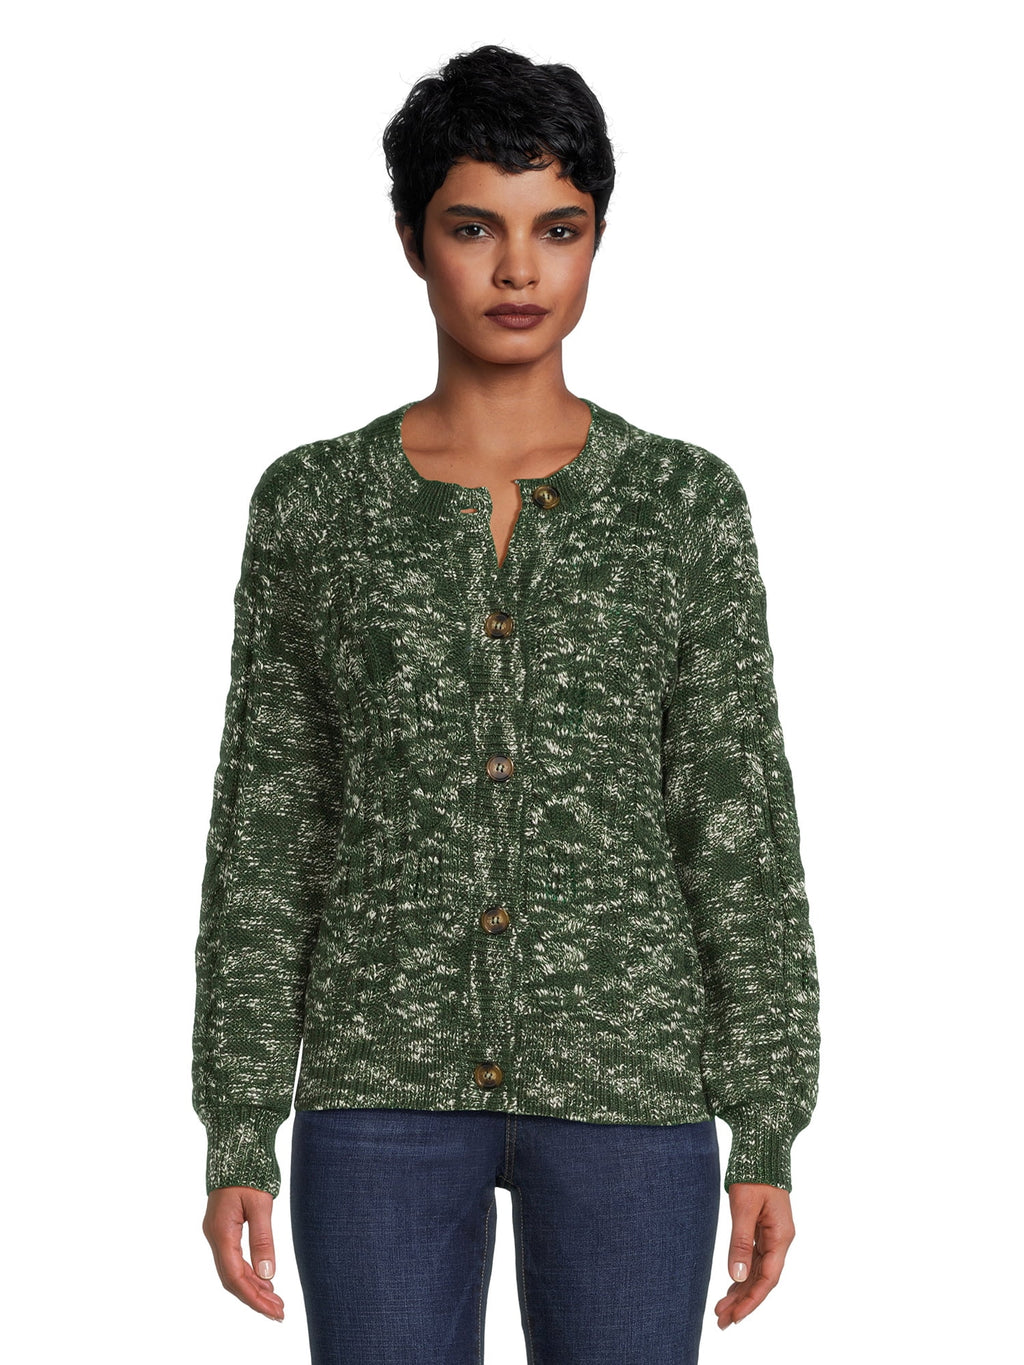 Time and Tru Women's Cable Knit Cardigan Sweater, Midweight, Sizes XS-XXXL - image 1 of 6